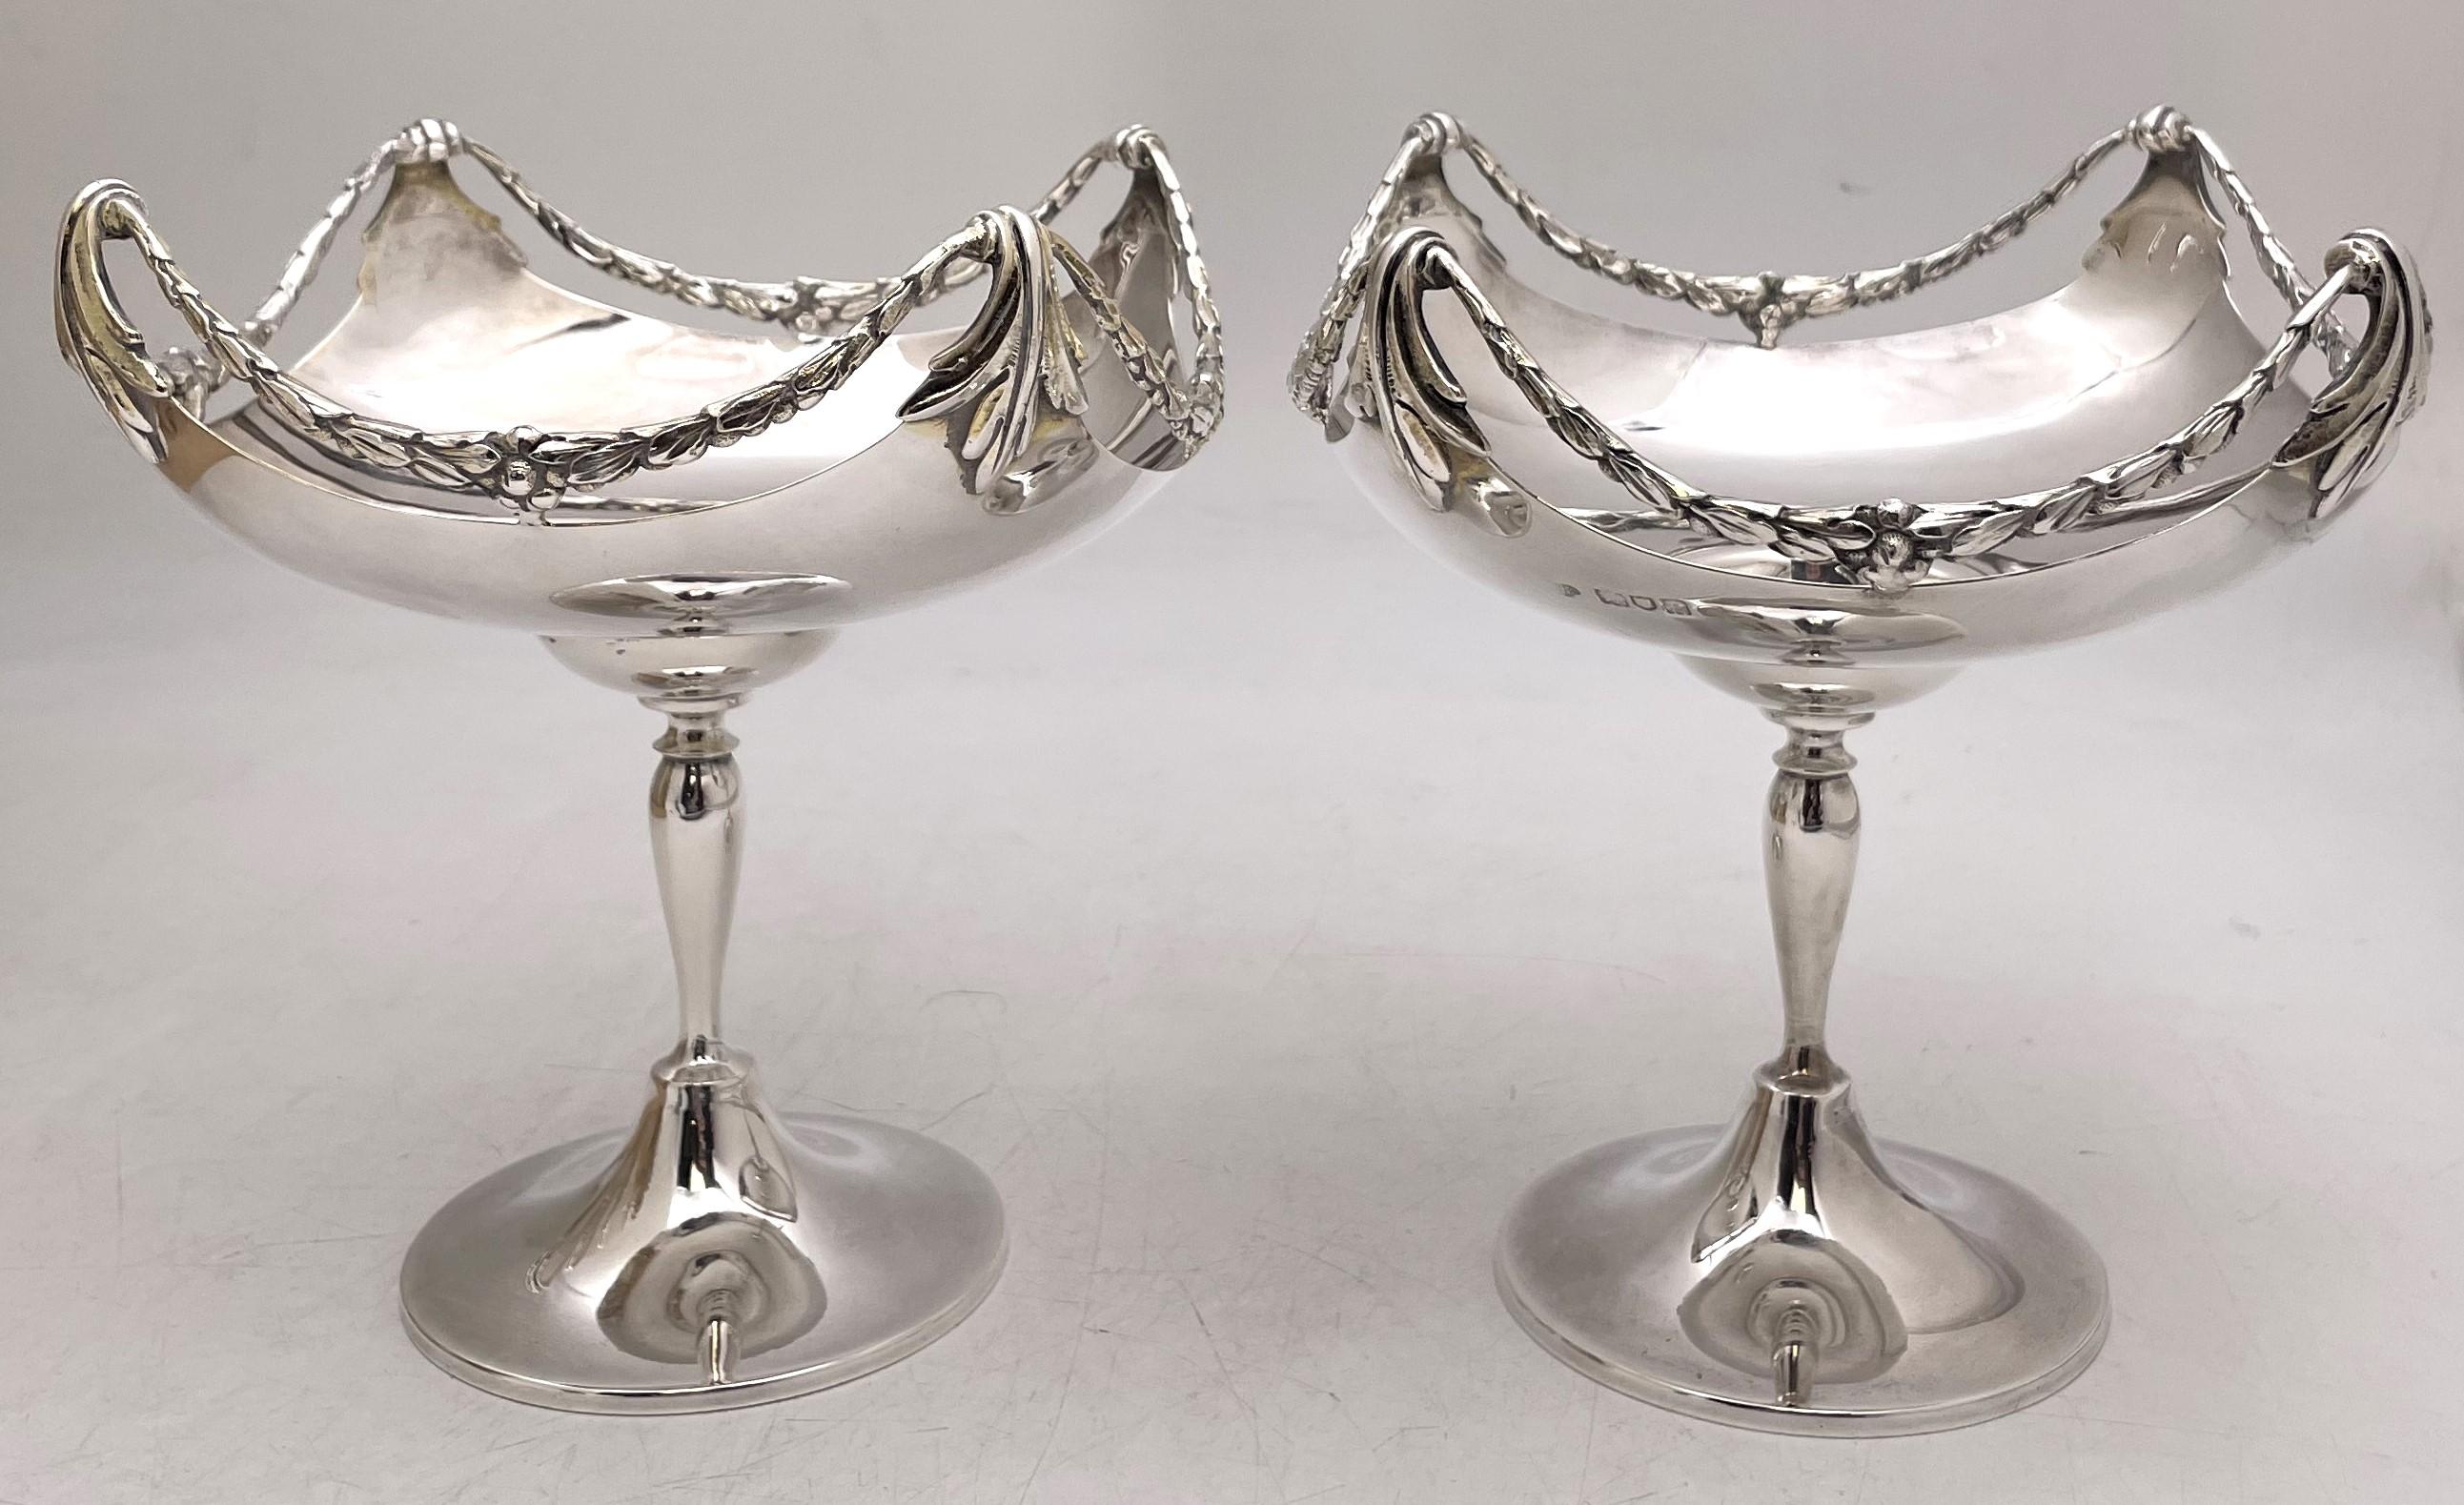 Pair of Goldsmiths & Silversmiths sterling silver compotes or footed bowls from 1910, beautifully adorned with wreath motifs. They measure approximately 7'' in height by 6 1/2'' in depth, weigh 22.7 troy ounces, and bear hallmarks as shown.